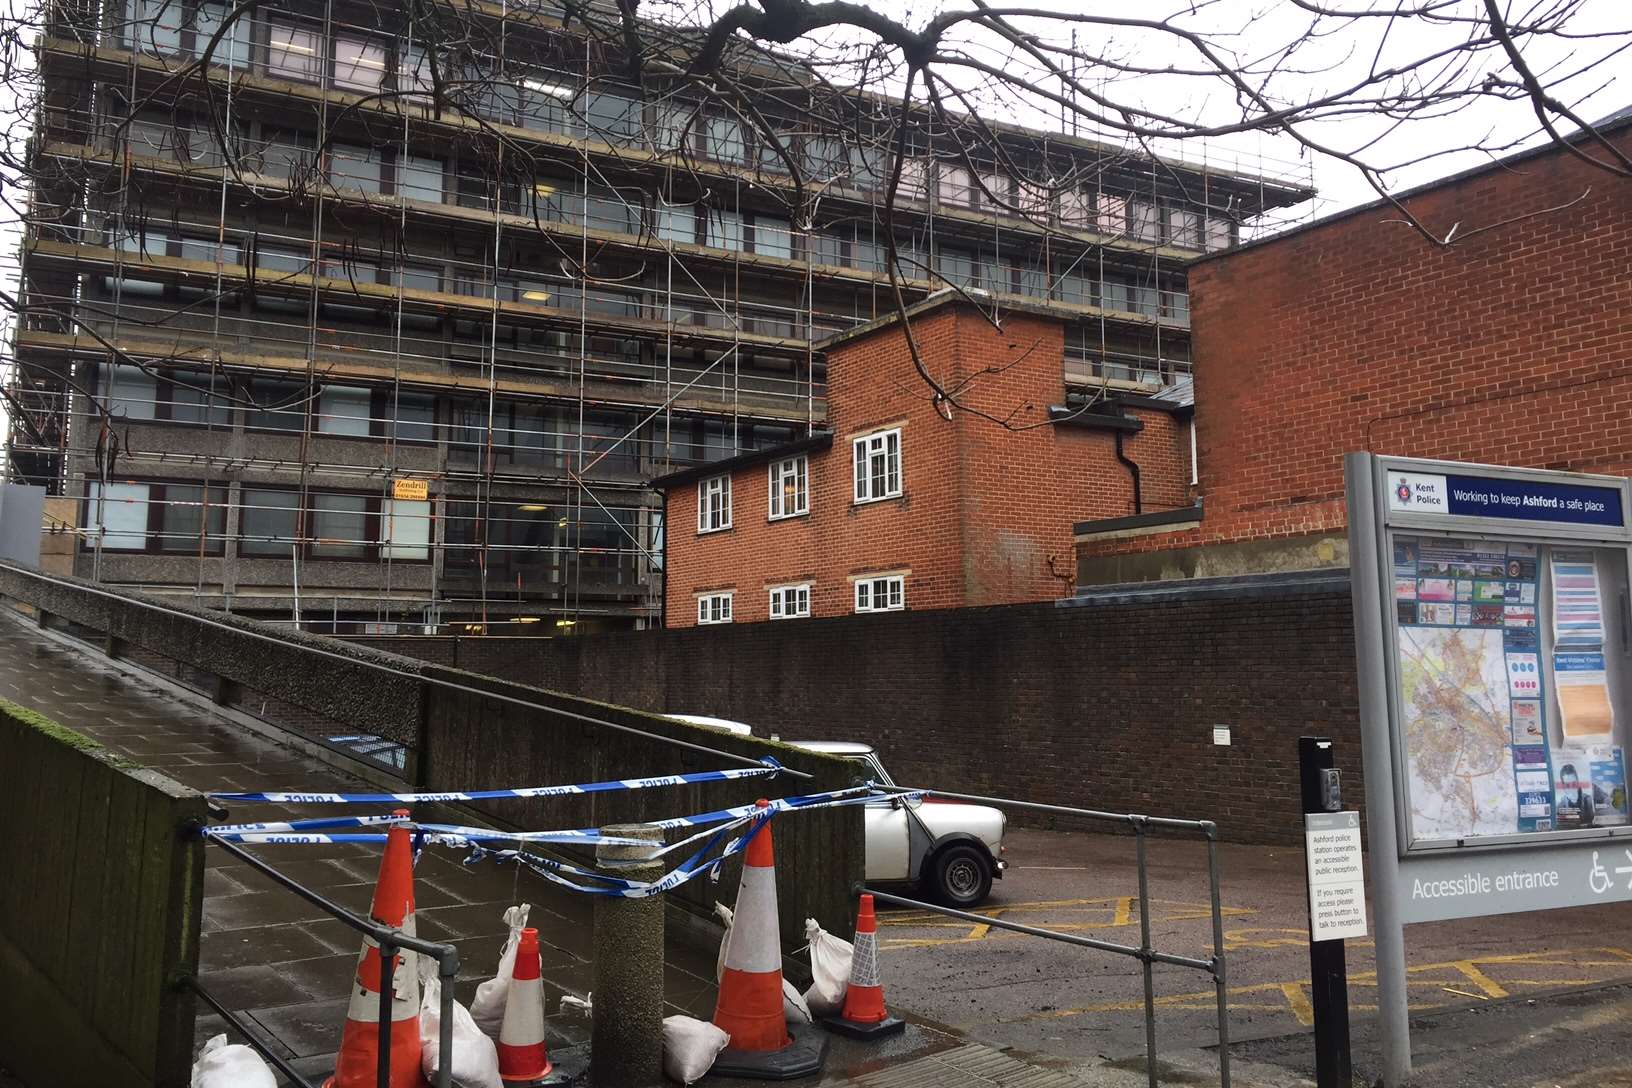 Access has been suspended as a precaution due to high winds affecting scaffolding